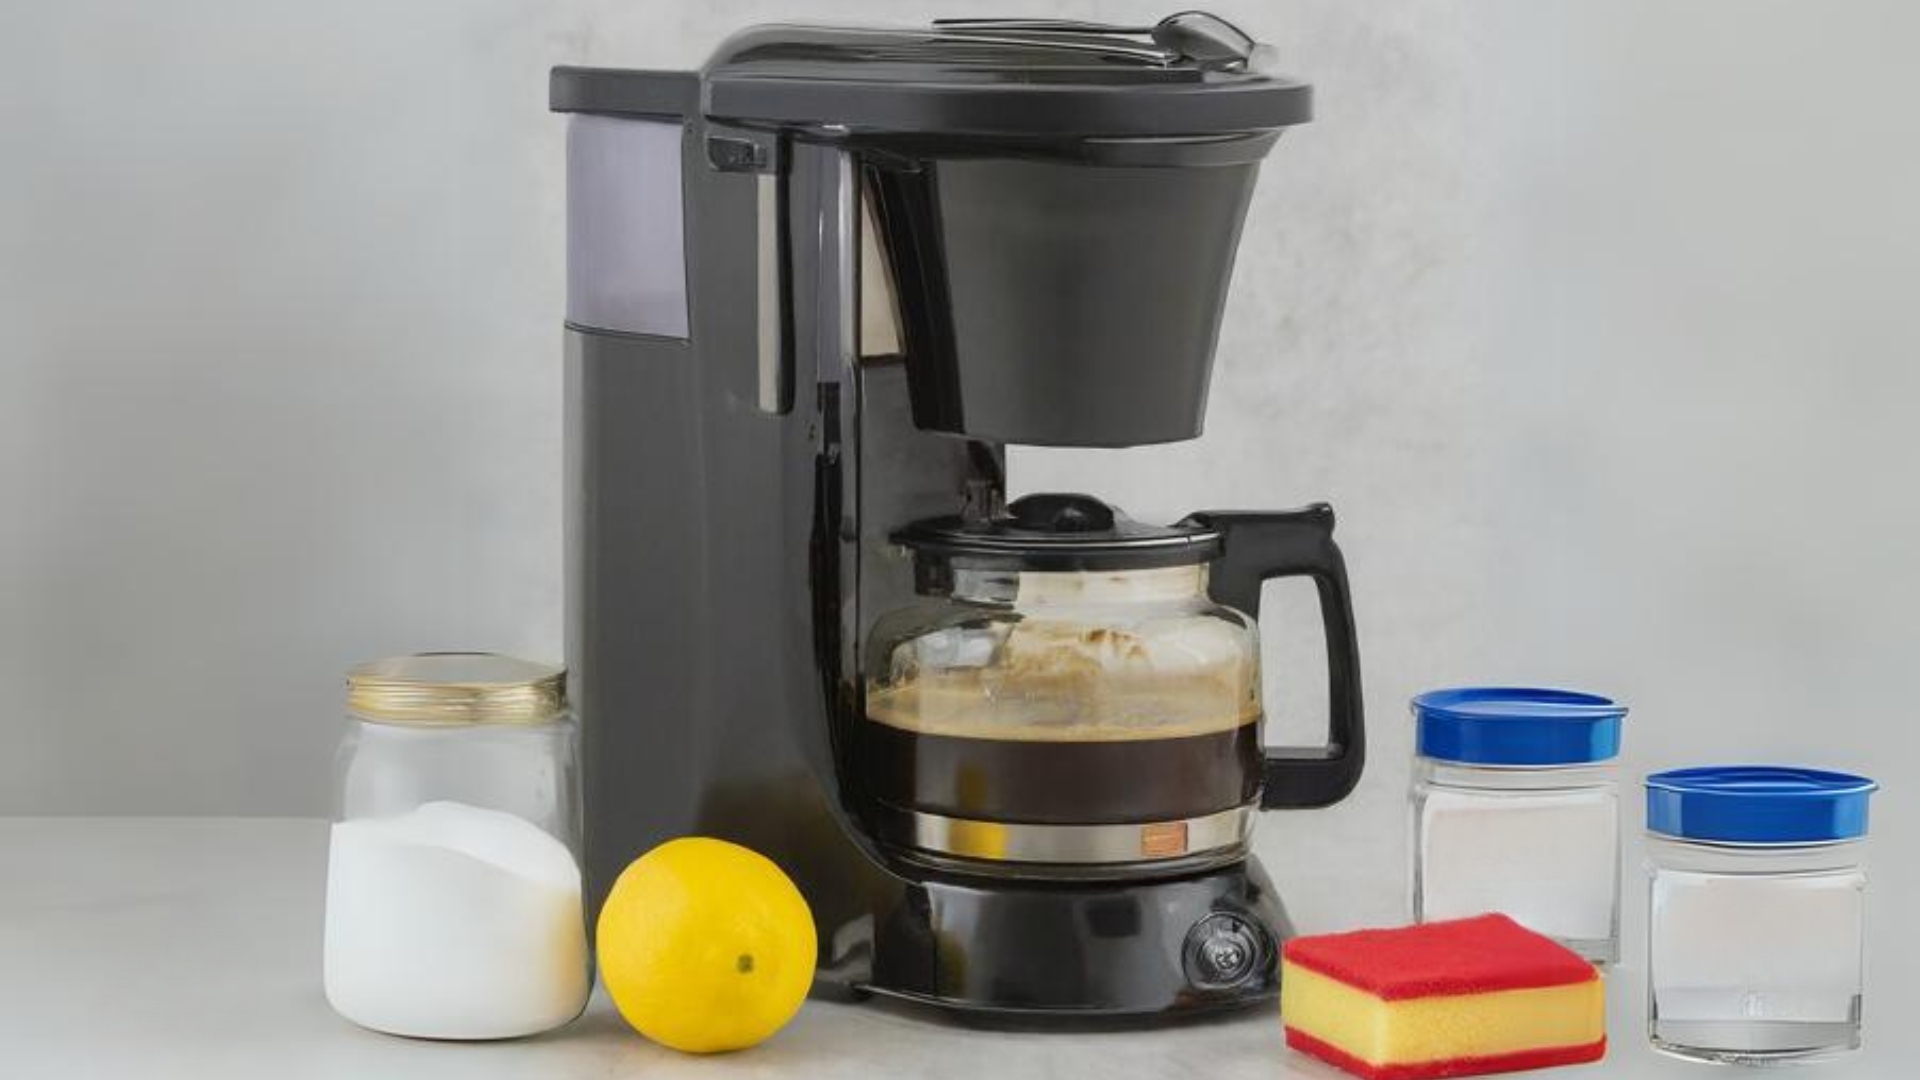 How To Clean A Coffee Maker Without Vinegar – 10 Easy ways